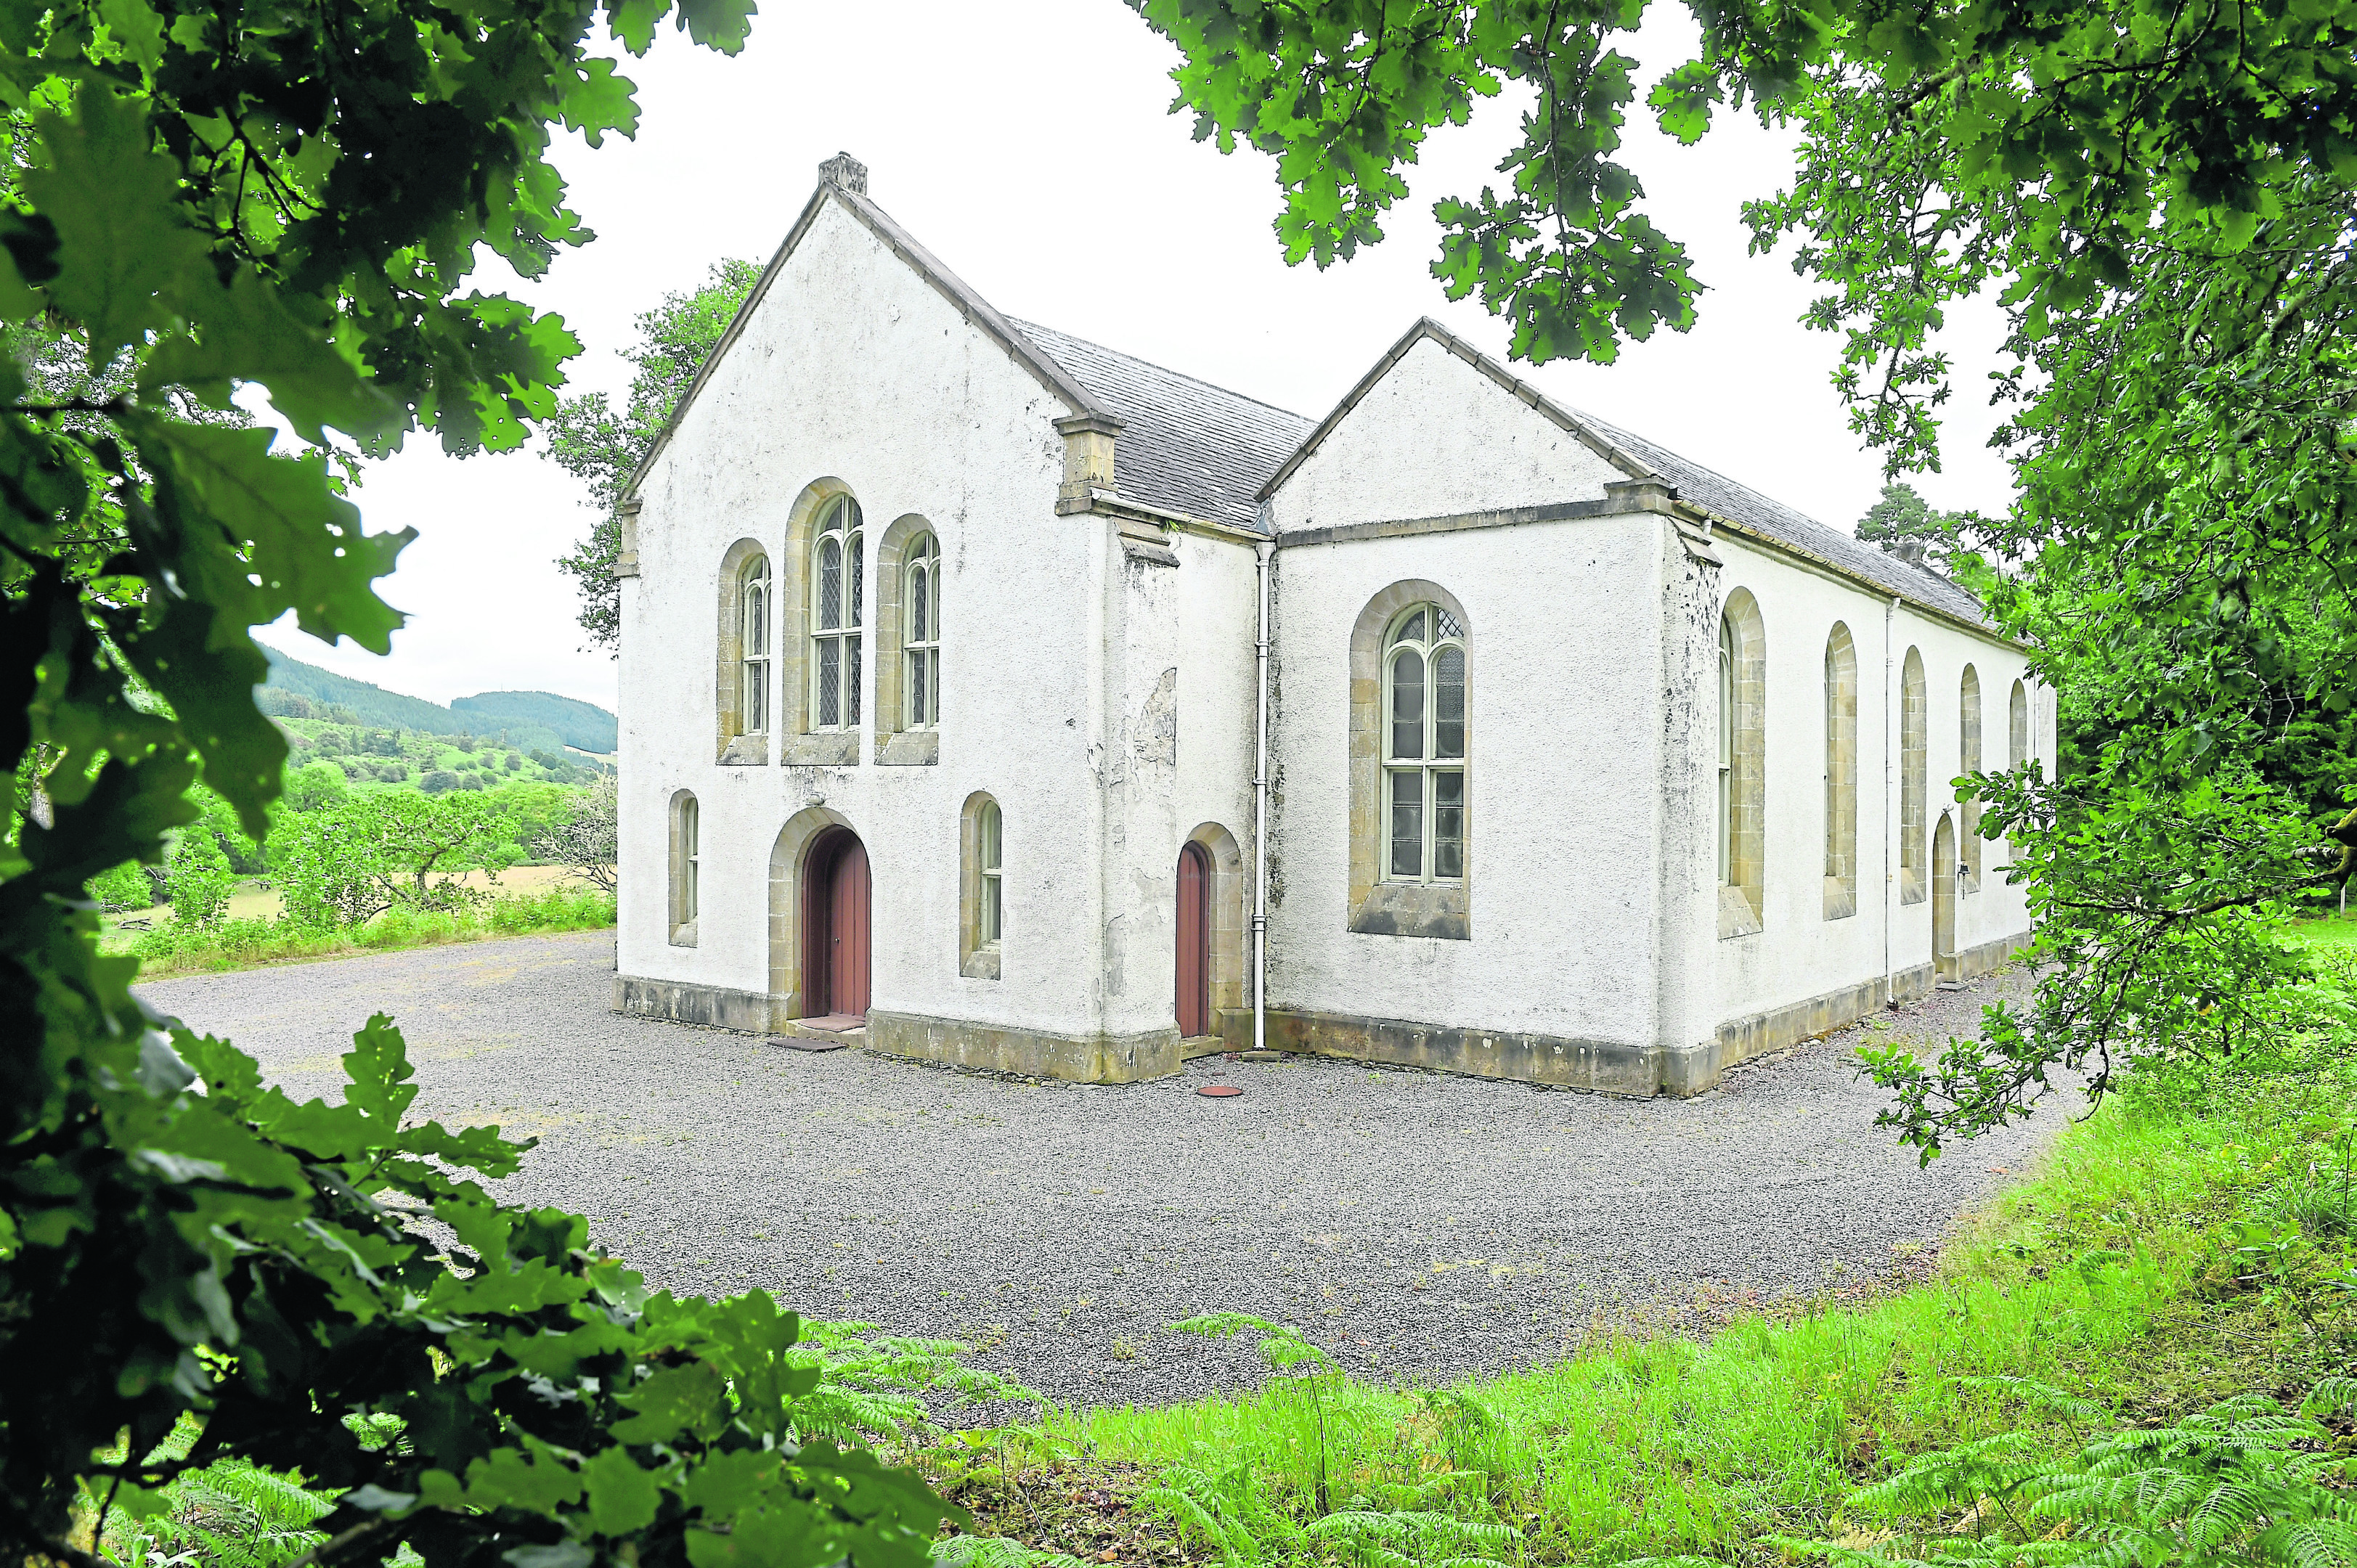 Eskadale Roman Catholic Church, Eskadale, Kiltarlity which is to be refurbished.
Picture by Sandy McCook.